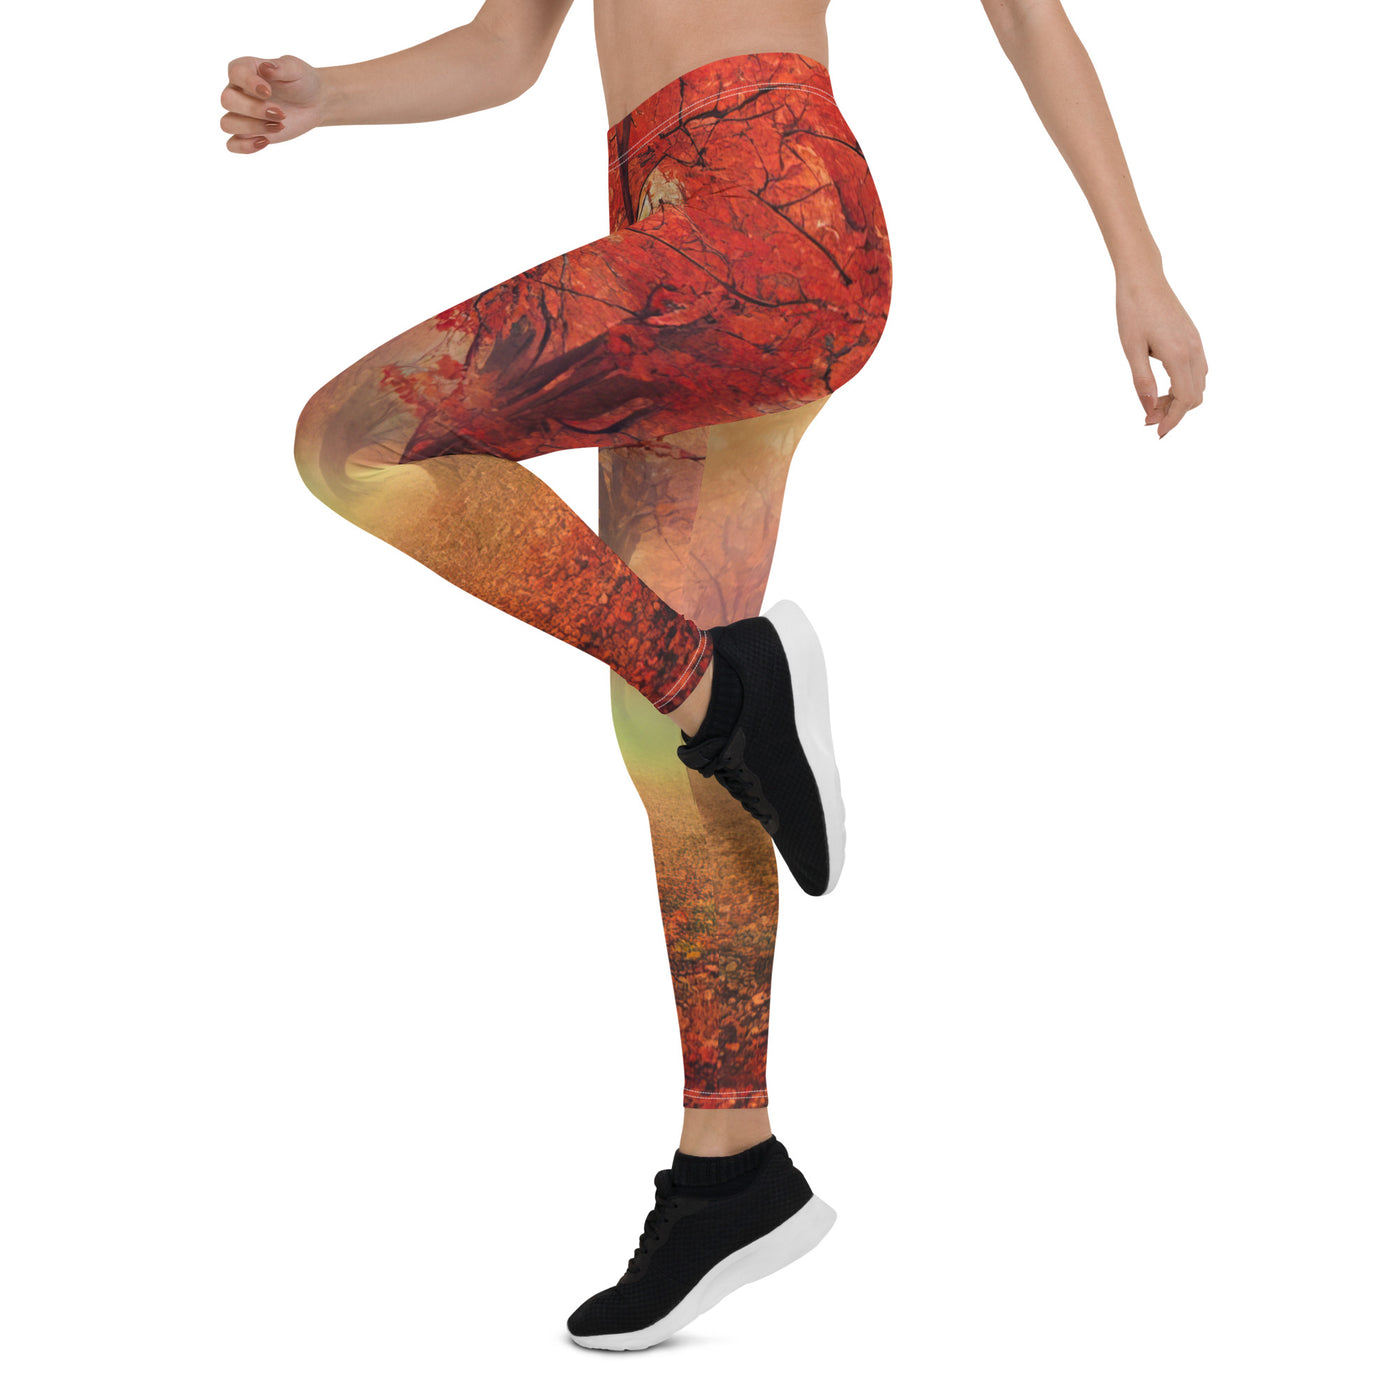 Wald im Herbst - Rote Herbstblätter - Leggings (All-Over Print) camping xxx